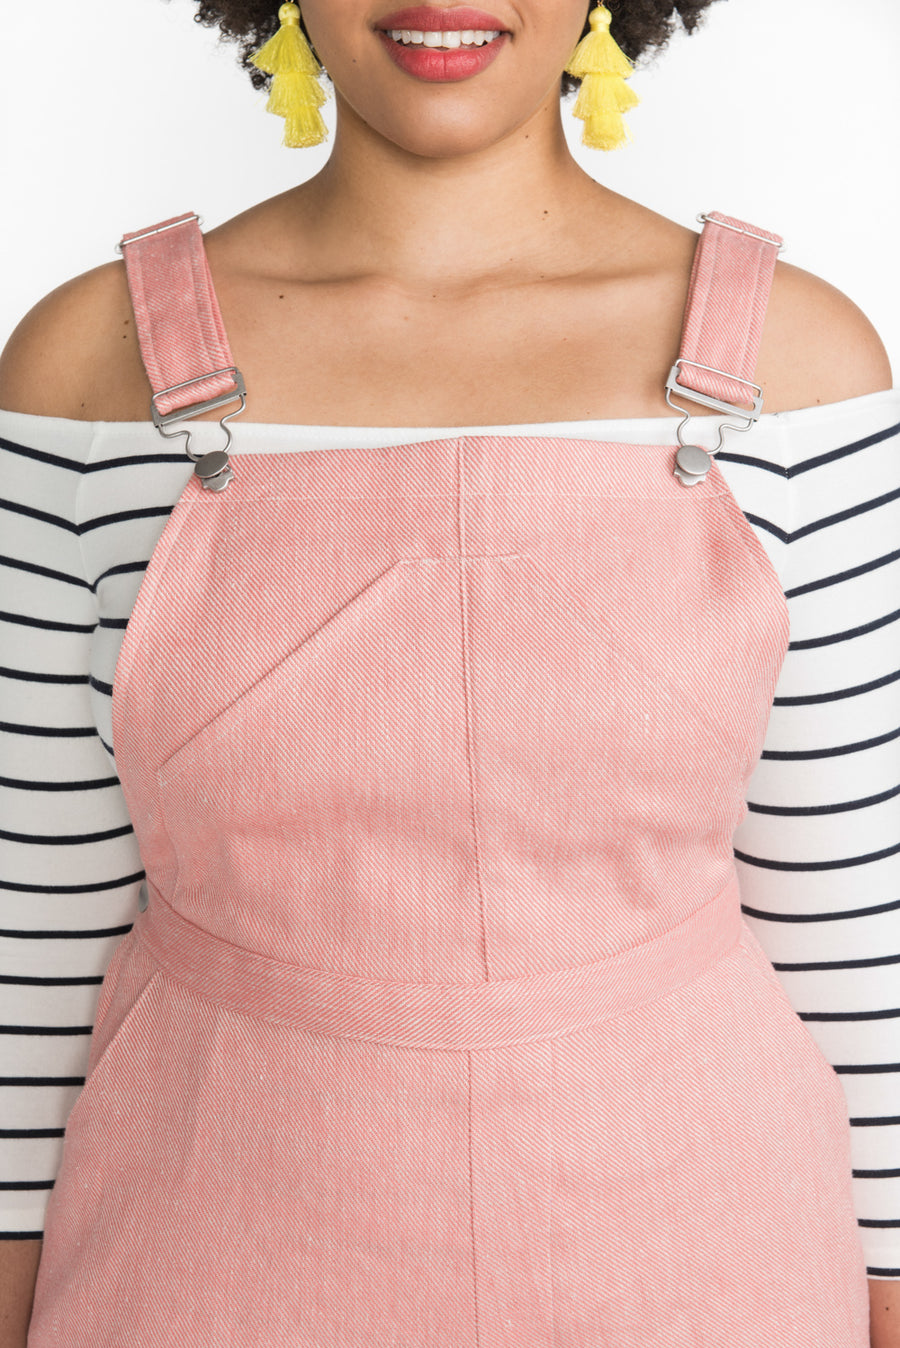 Jenny Overalls Pattern | Dungarees Pattern  // from Closet Core Patterns